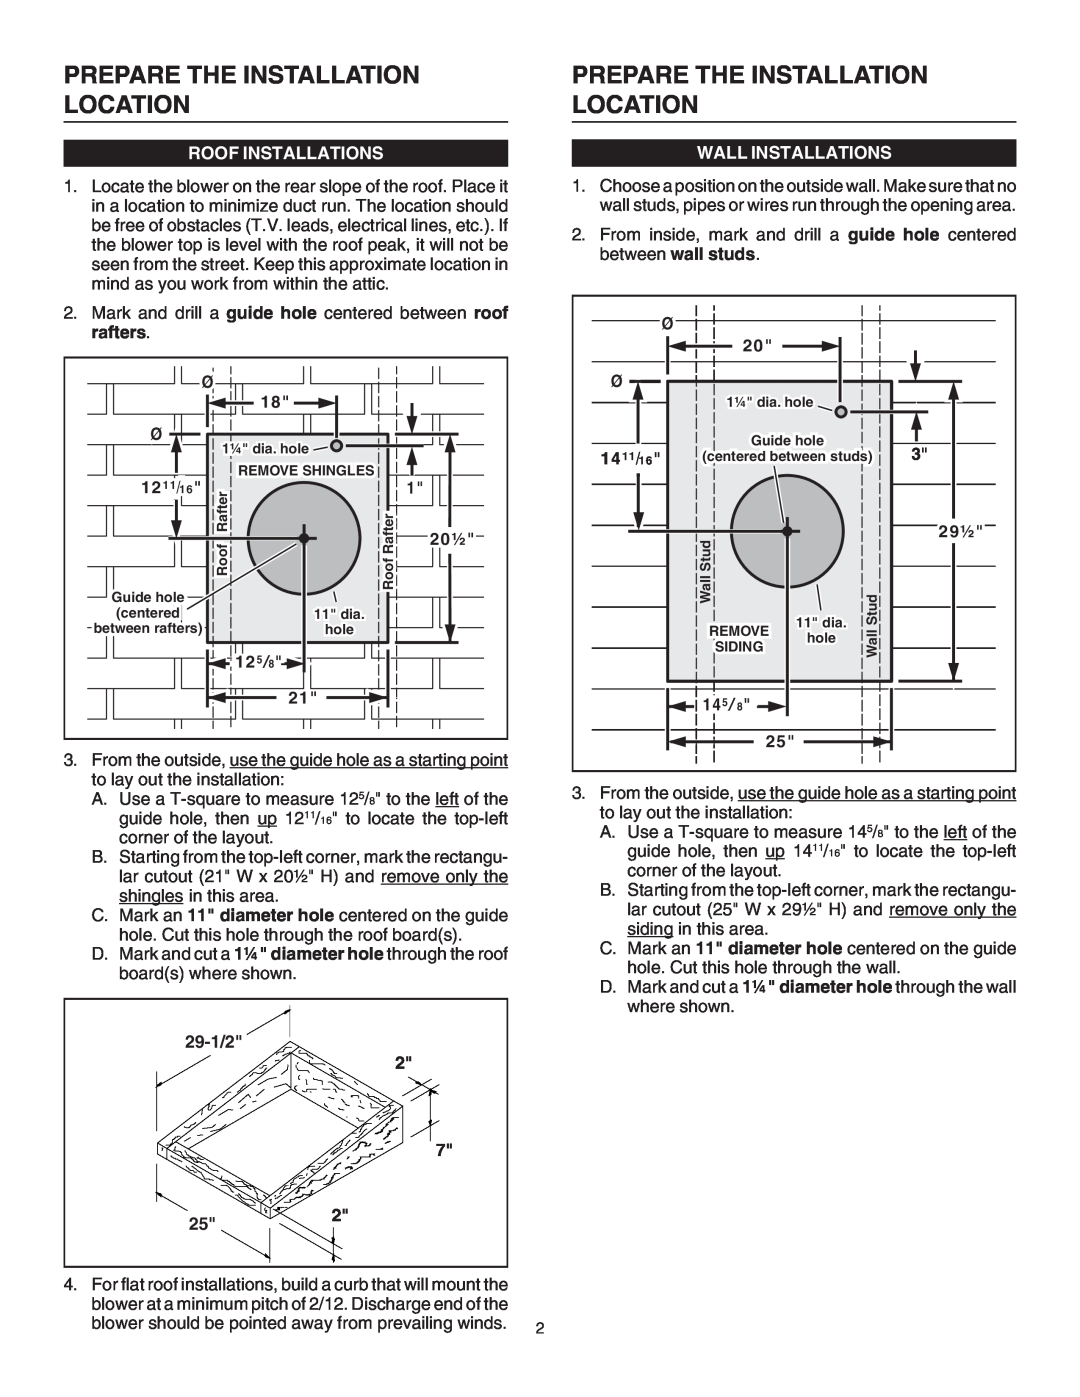 Broan 336 specifications Prepare The Installation Location, Roof Installations, Wall Installations 